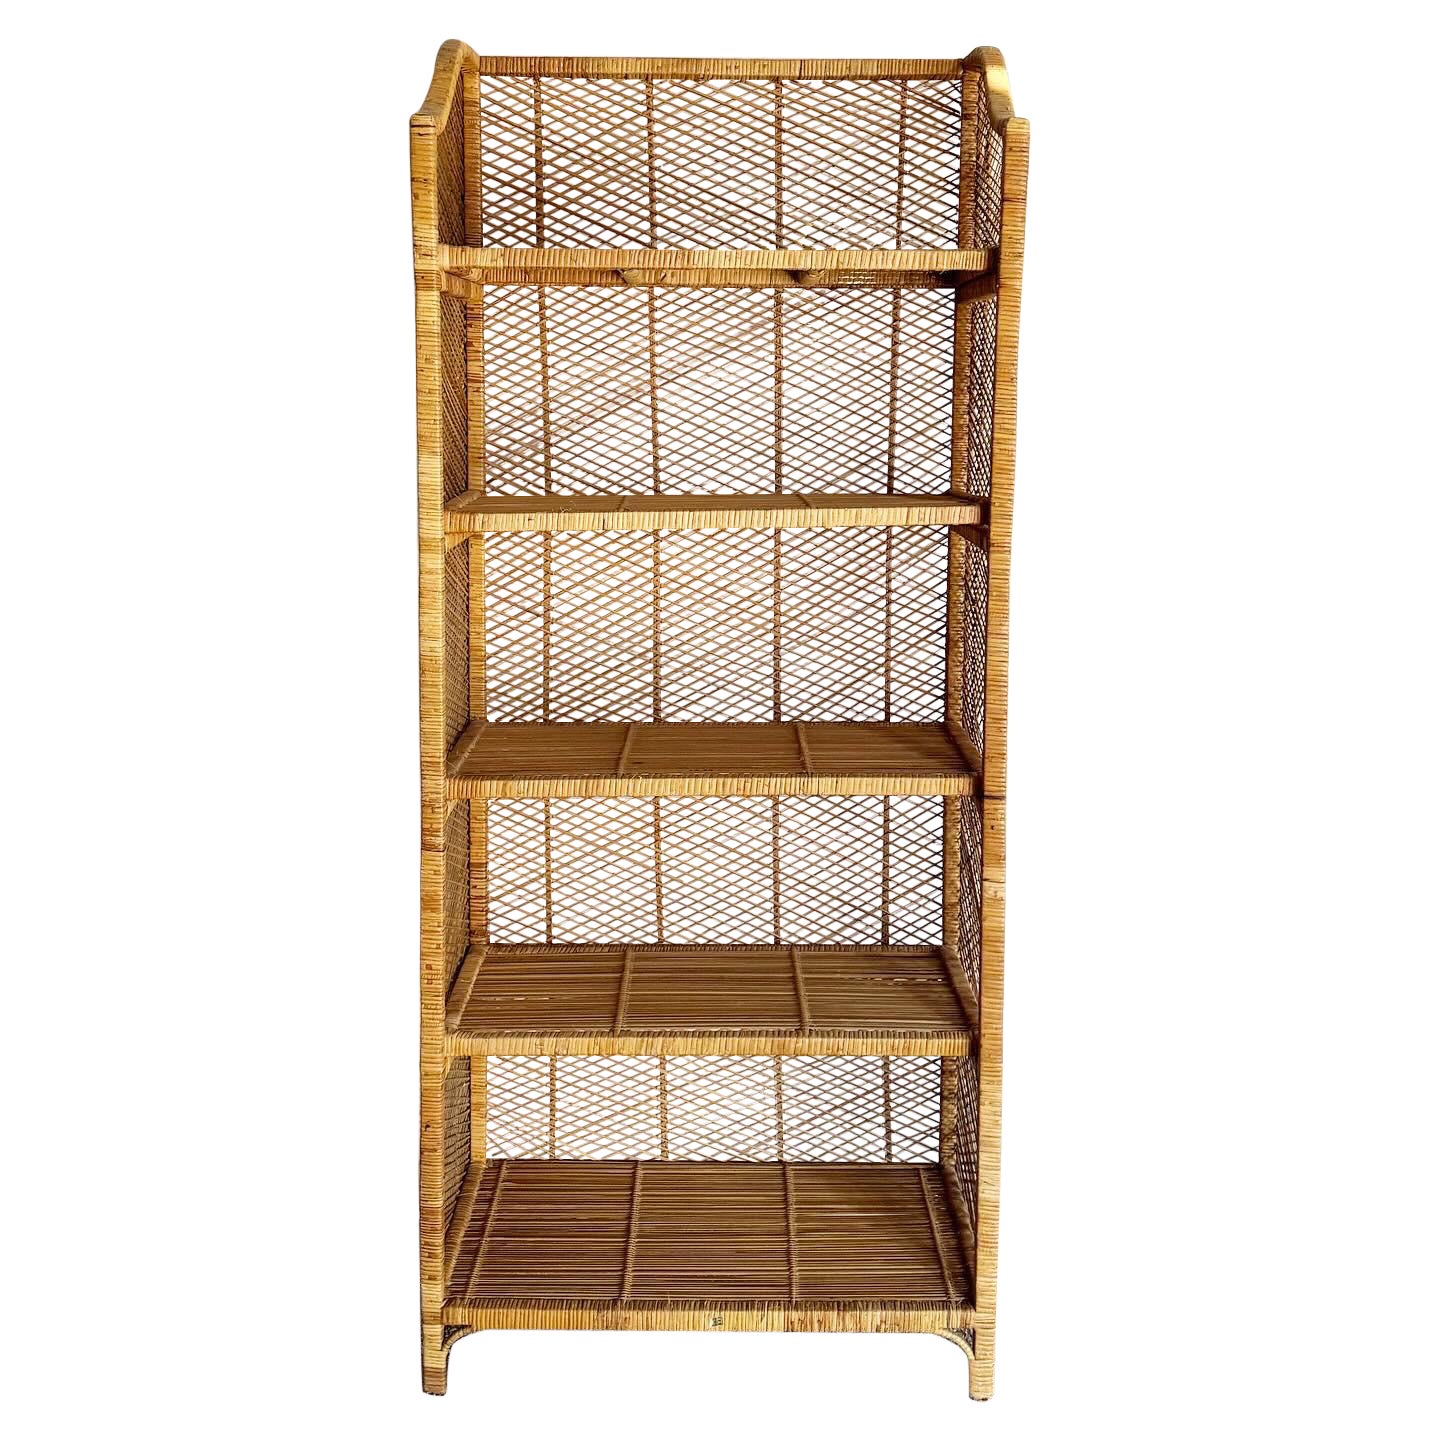 Boho Chic Wicker Rattan Etagere With 4 Removable Shelves